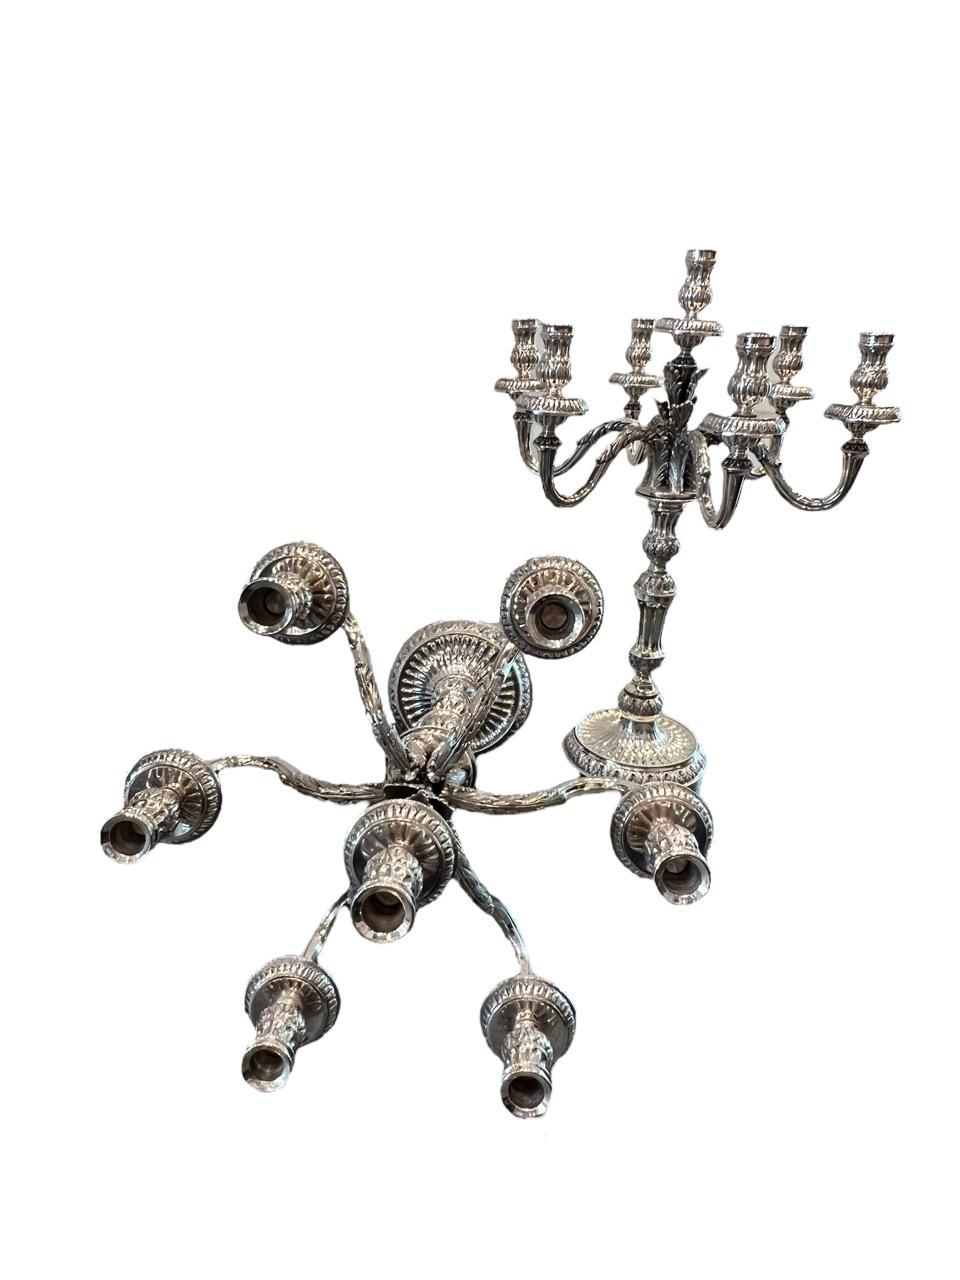 1910 Italian Pair of Sterling Silver Candelabras, Tall and Heavy 1